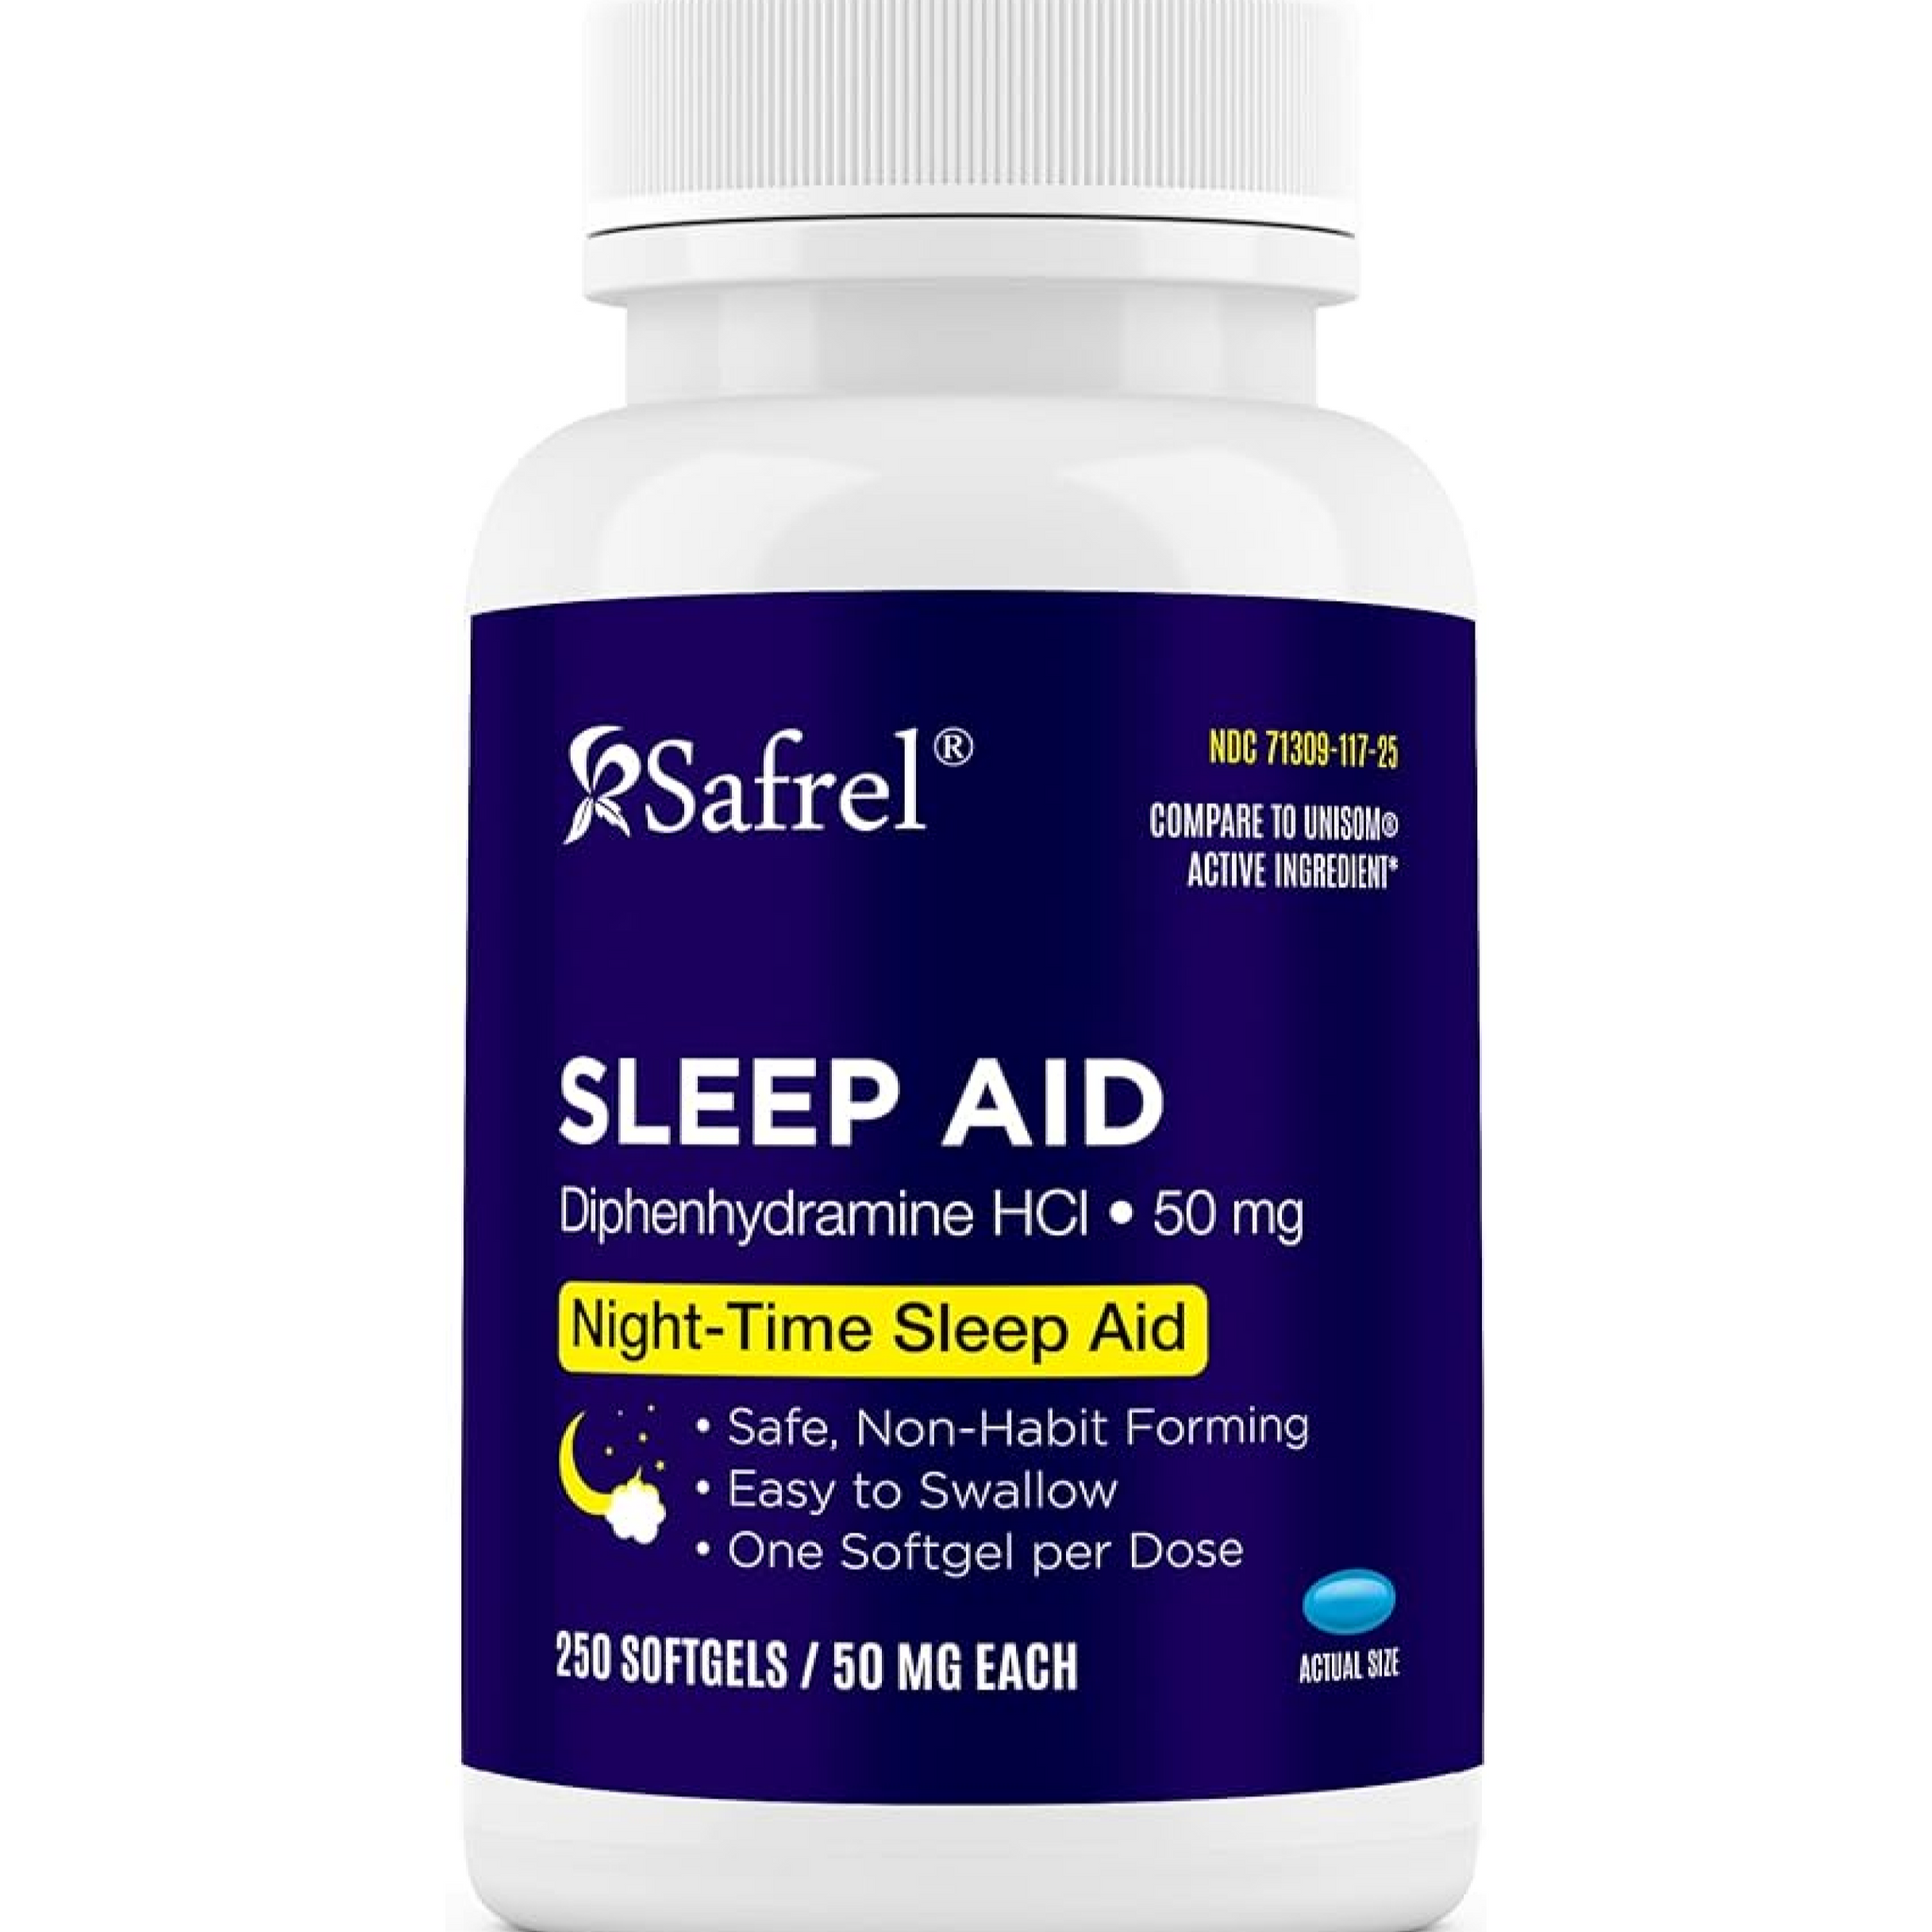 Safrel Nighttime Sleep Aid, Diphenhydramine HCl 50mg, 250 Softgels | Strong Non Habit-Forming Restful Sleeping Support for Men & Women | Fall Asleep Faster & Wake up Refreshed